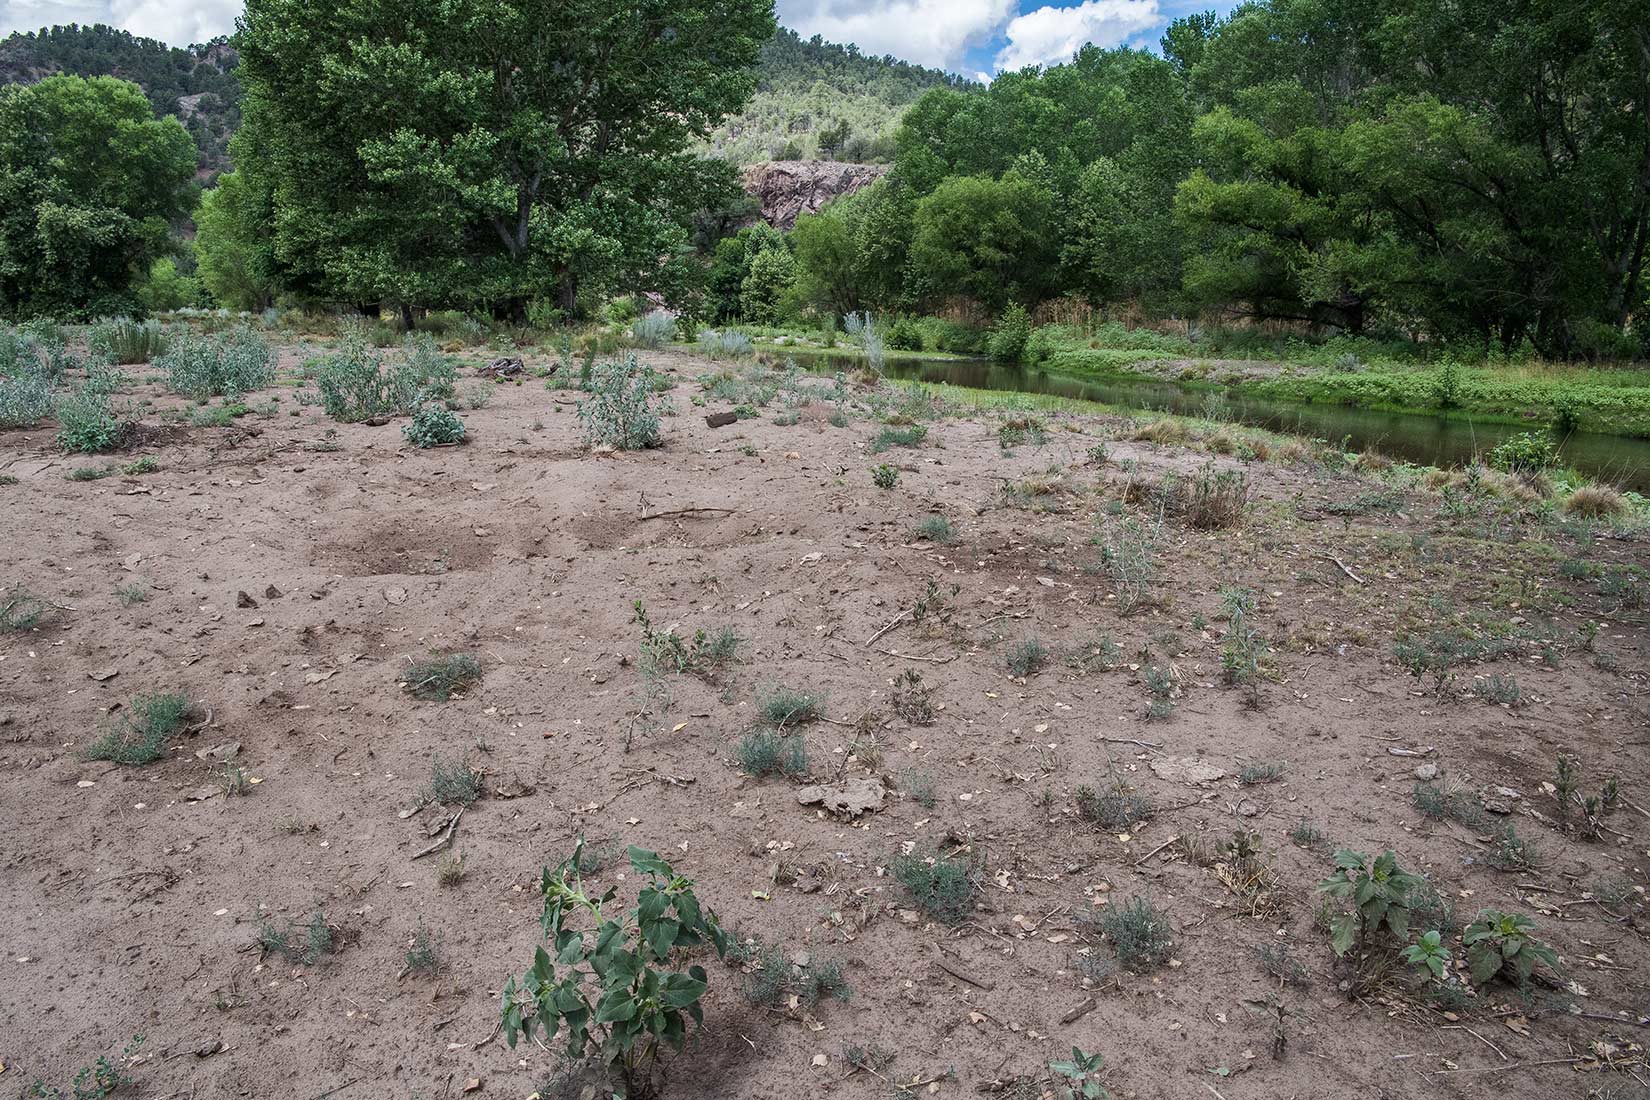 Along the Gila River, the feral cattle are said to trample stream banks and springs, causing erosion and sedimentation. (Courtesy Robin Silver)